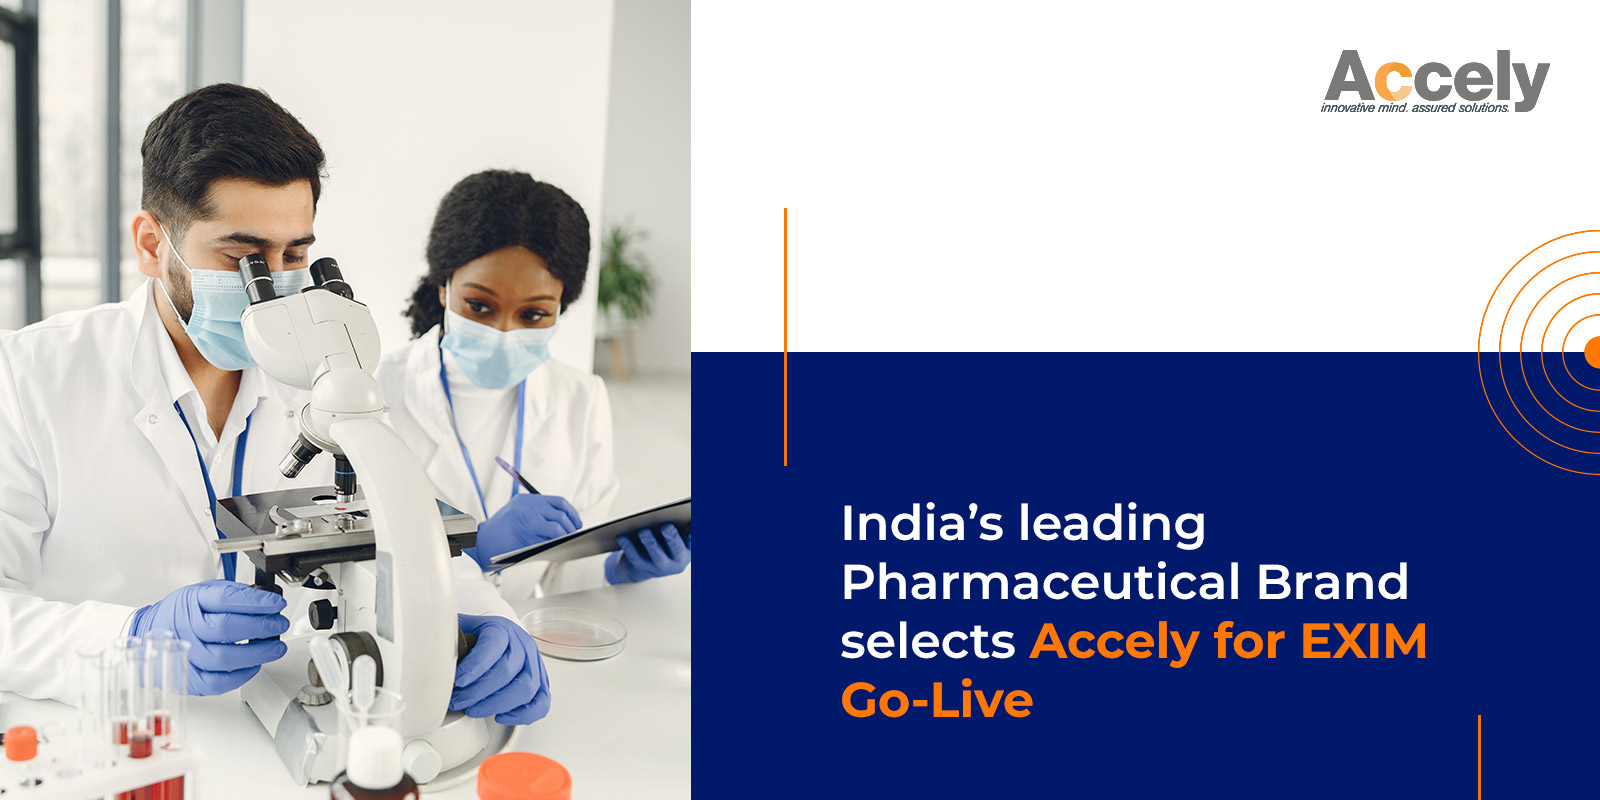 India’s leading Pharmaceutical Brand selects Accely for EXIM Go-Live